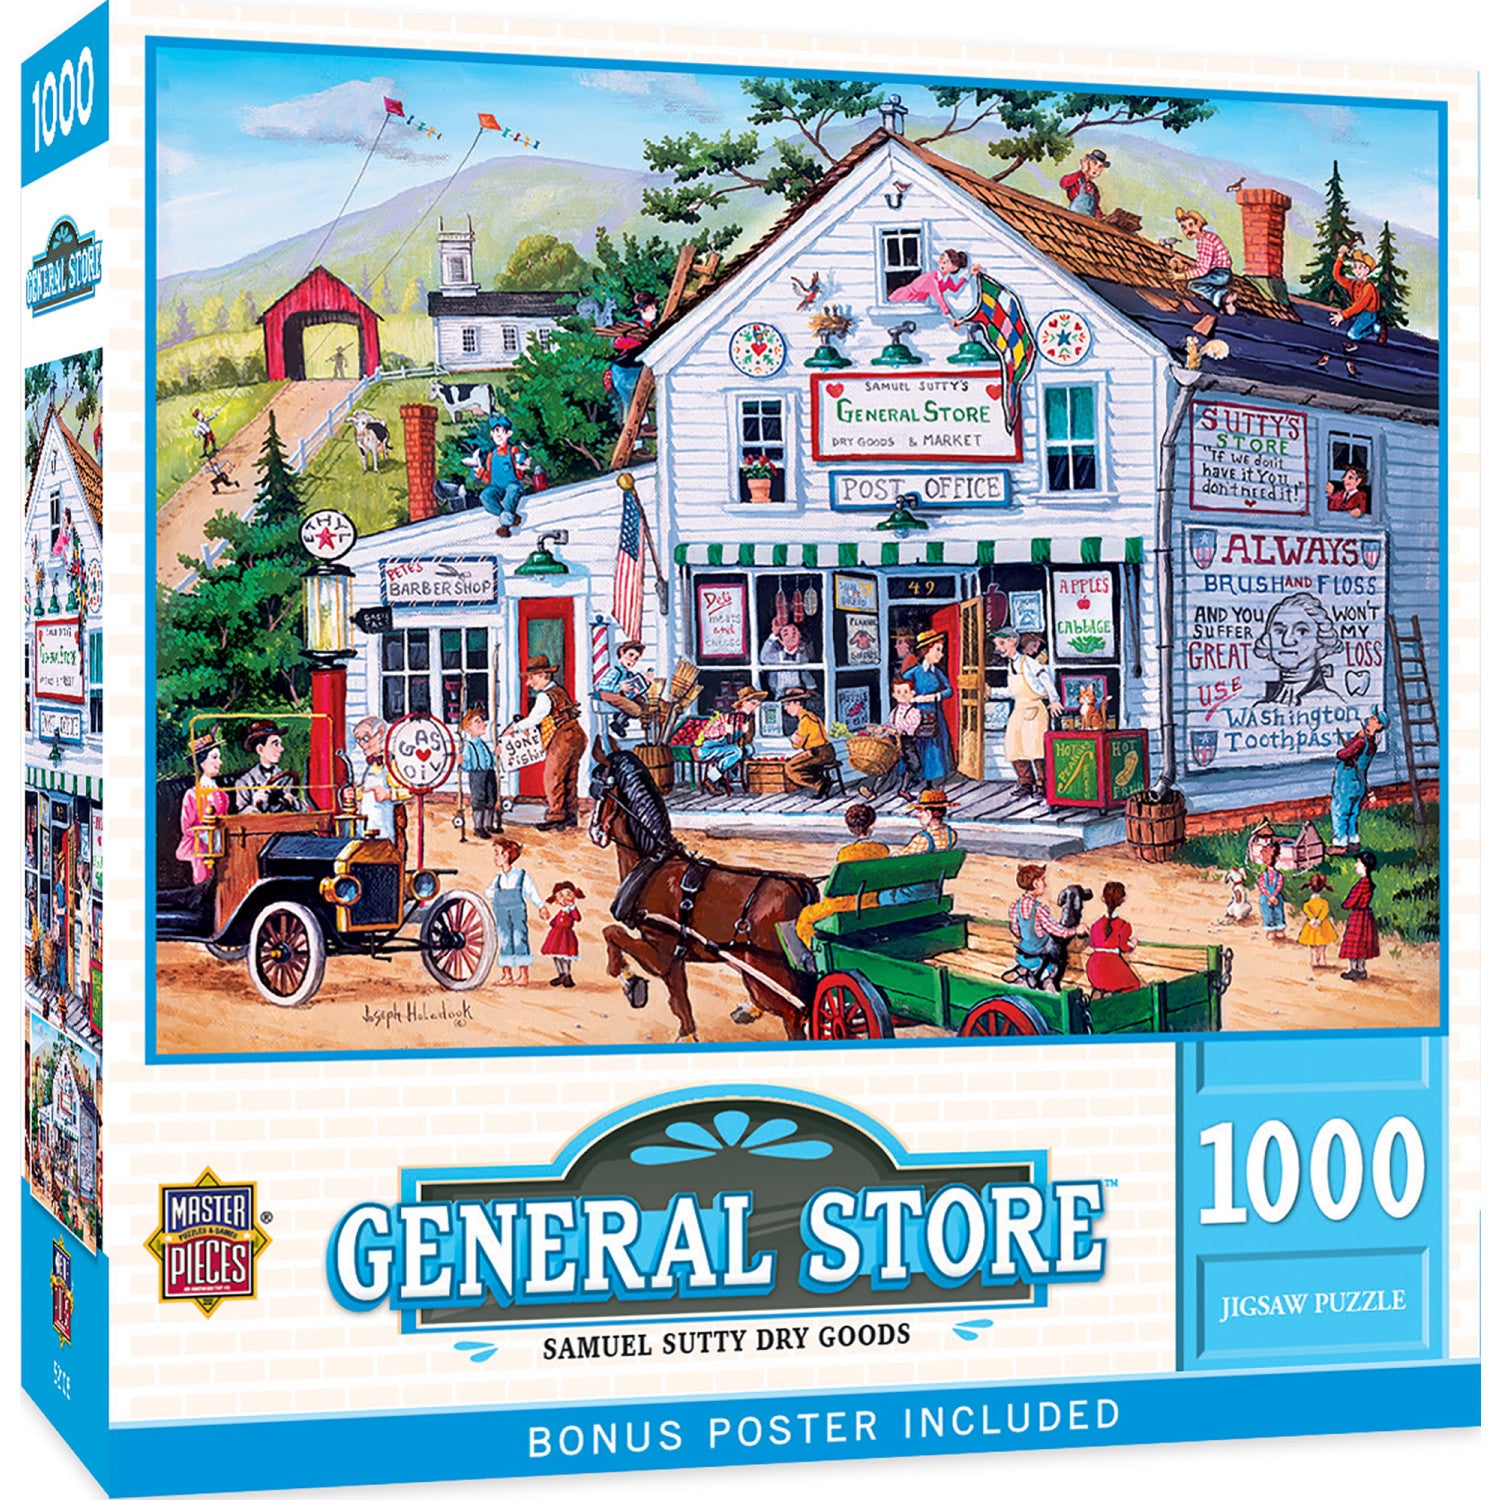 General Store - Samuel Sutty Dry Goods 1000 Piece Jigsaw Puzzle